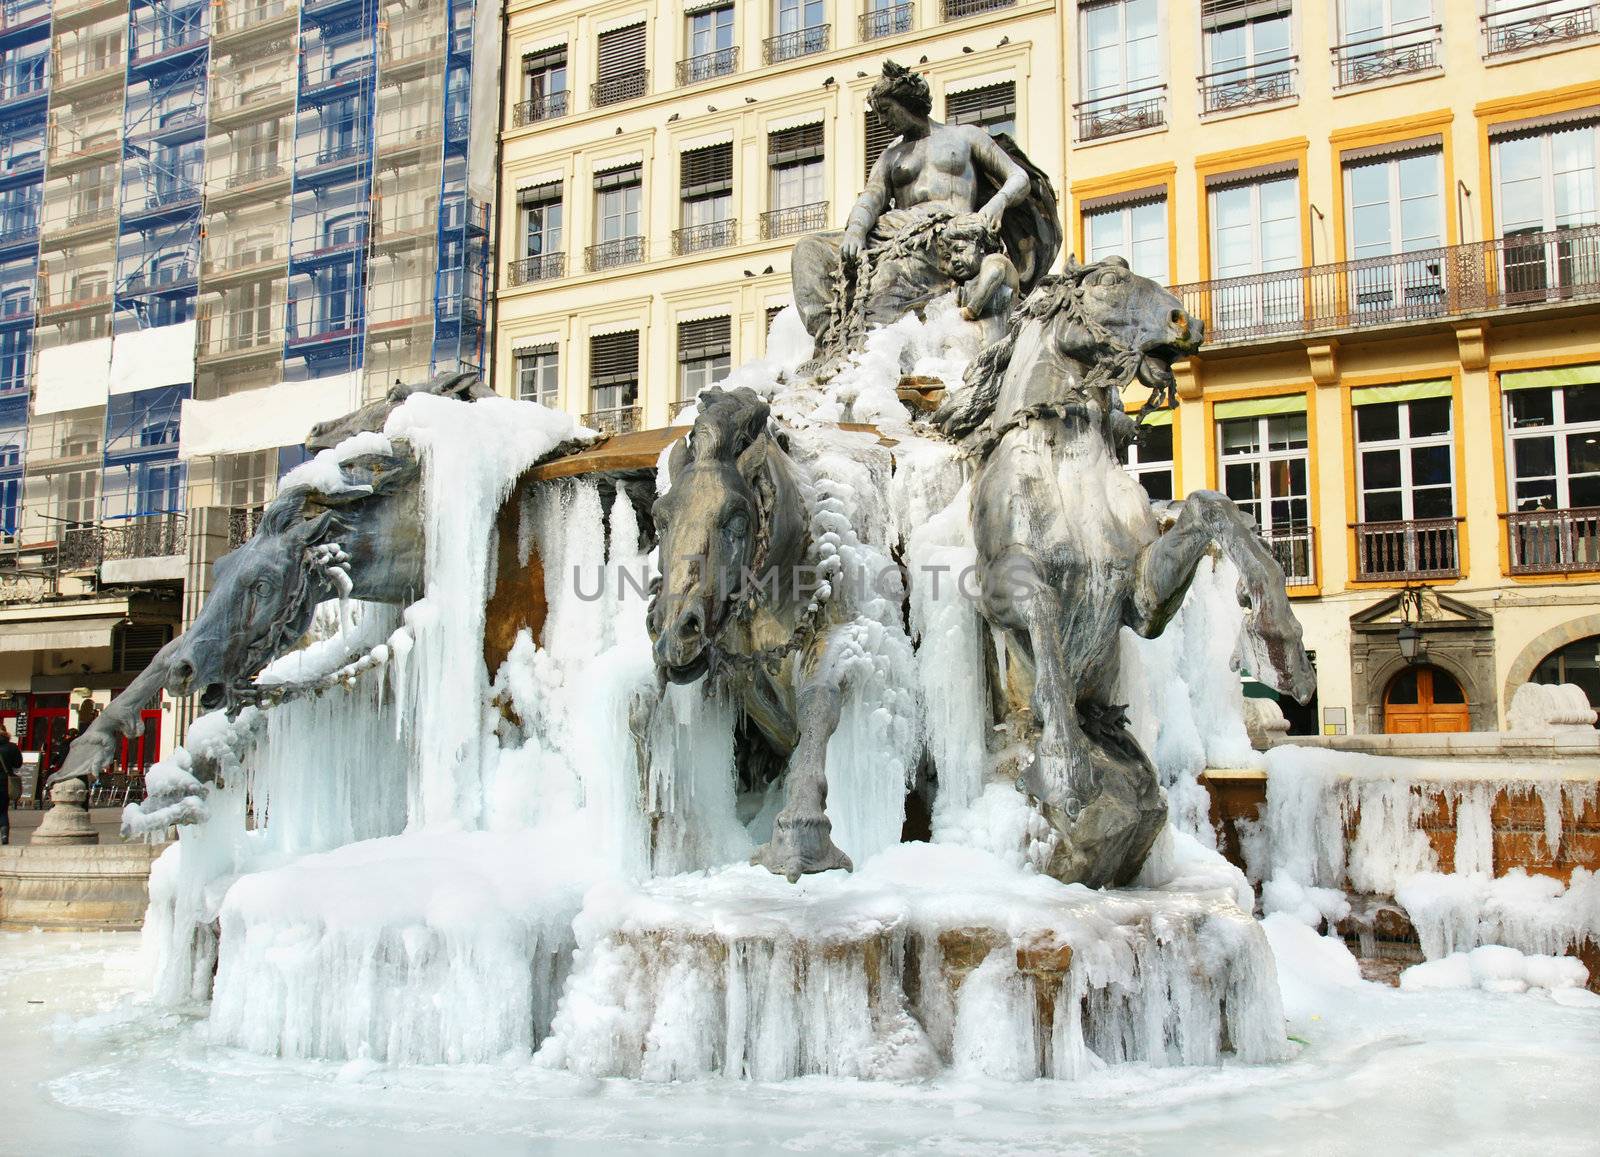 Cold climate: frozen Bartholdi fountain with bronze horse and statues coming out of ice, at the place des terreaux, Lyon, France.